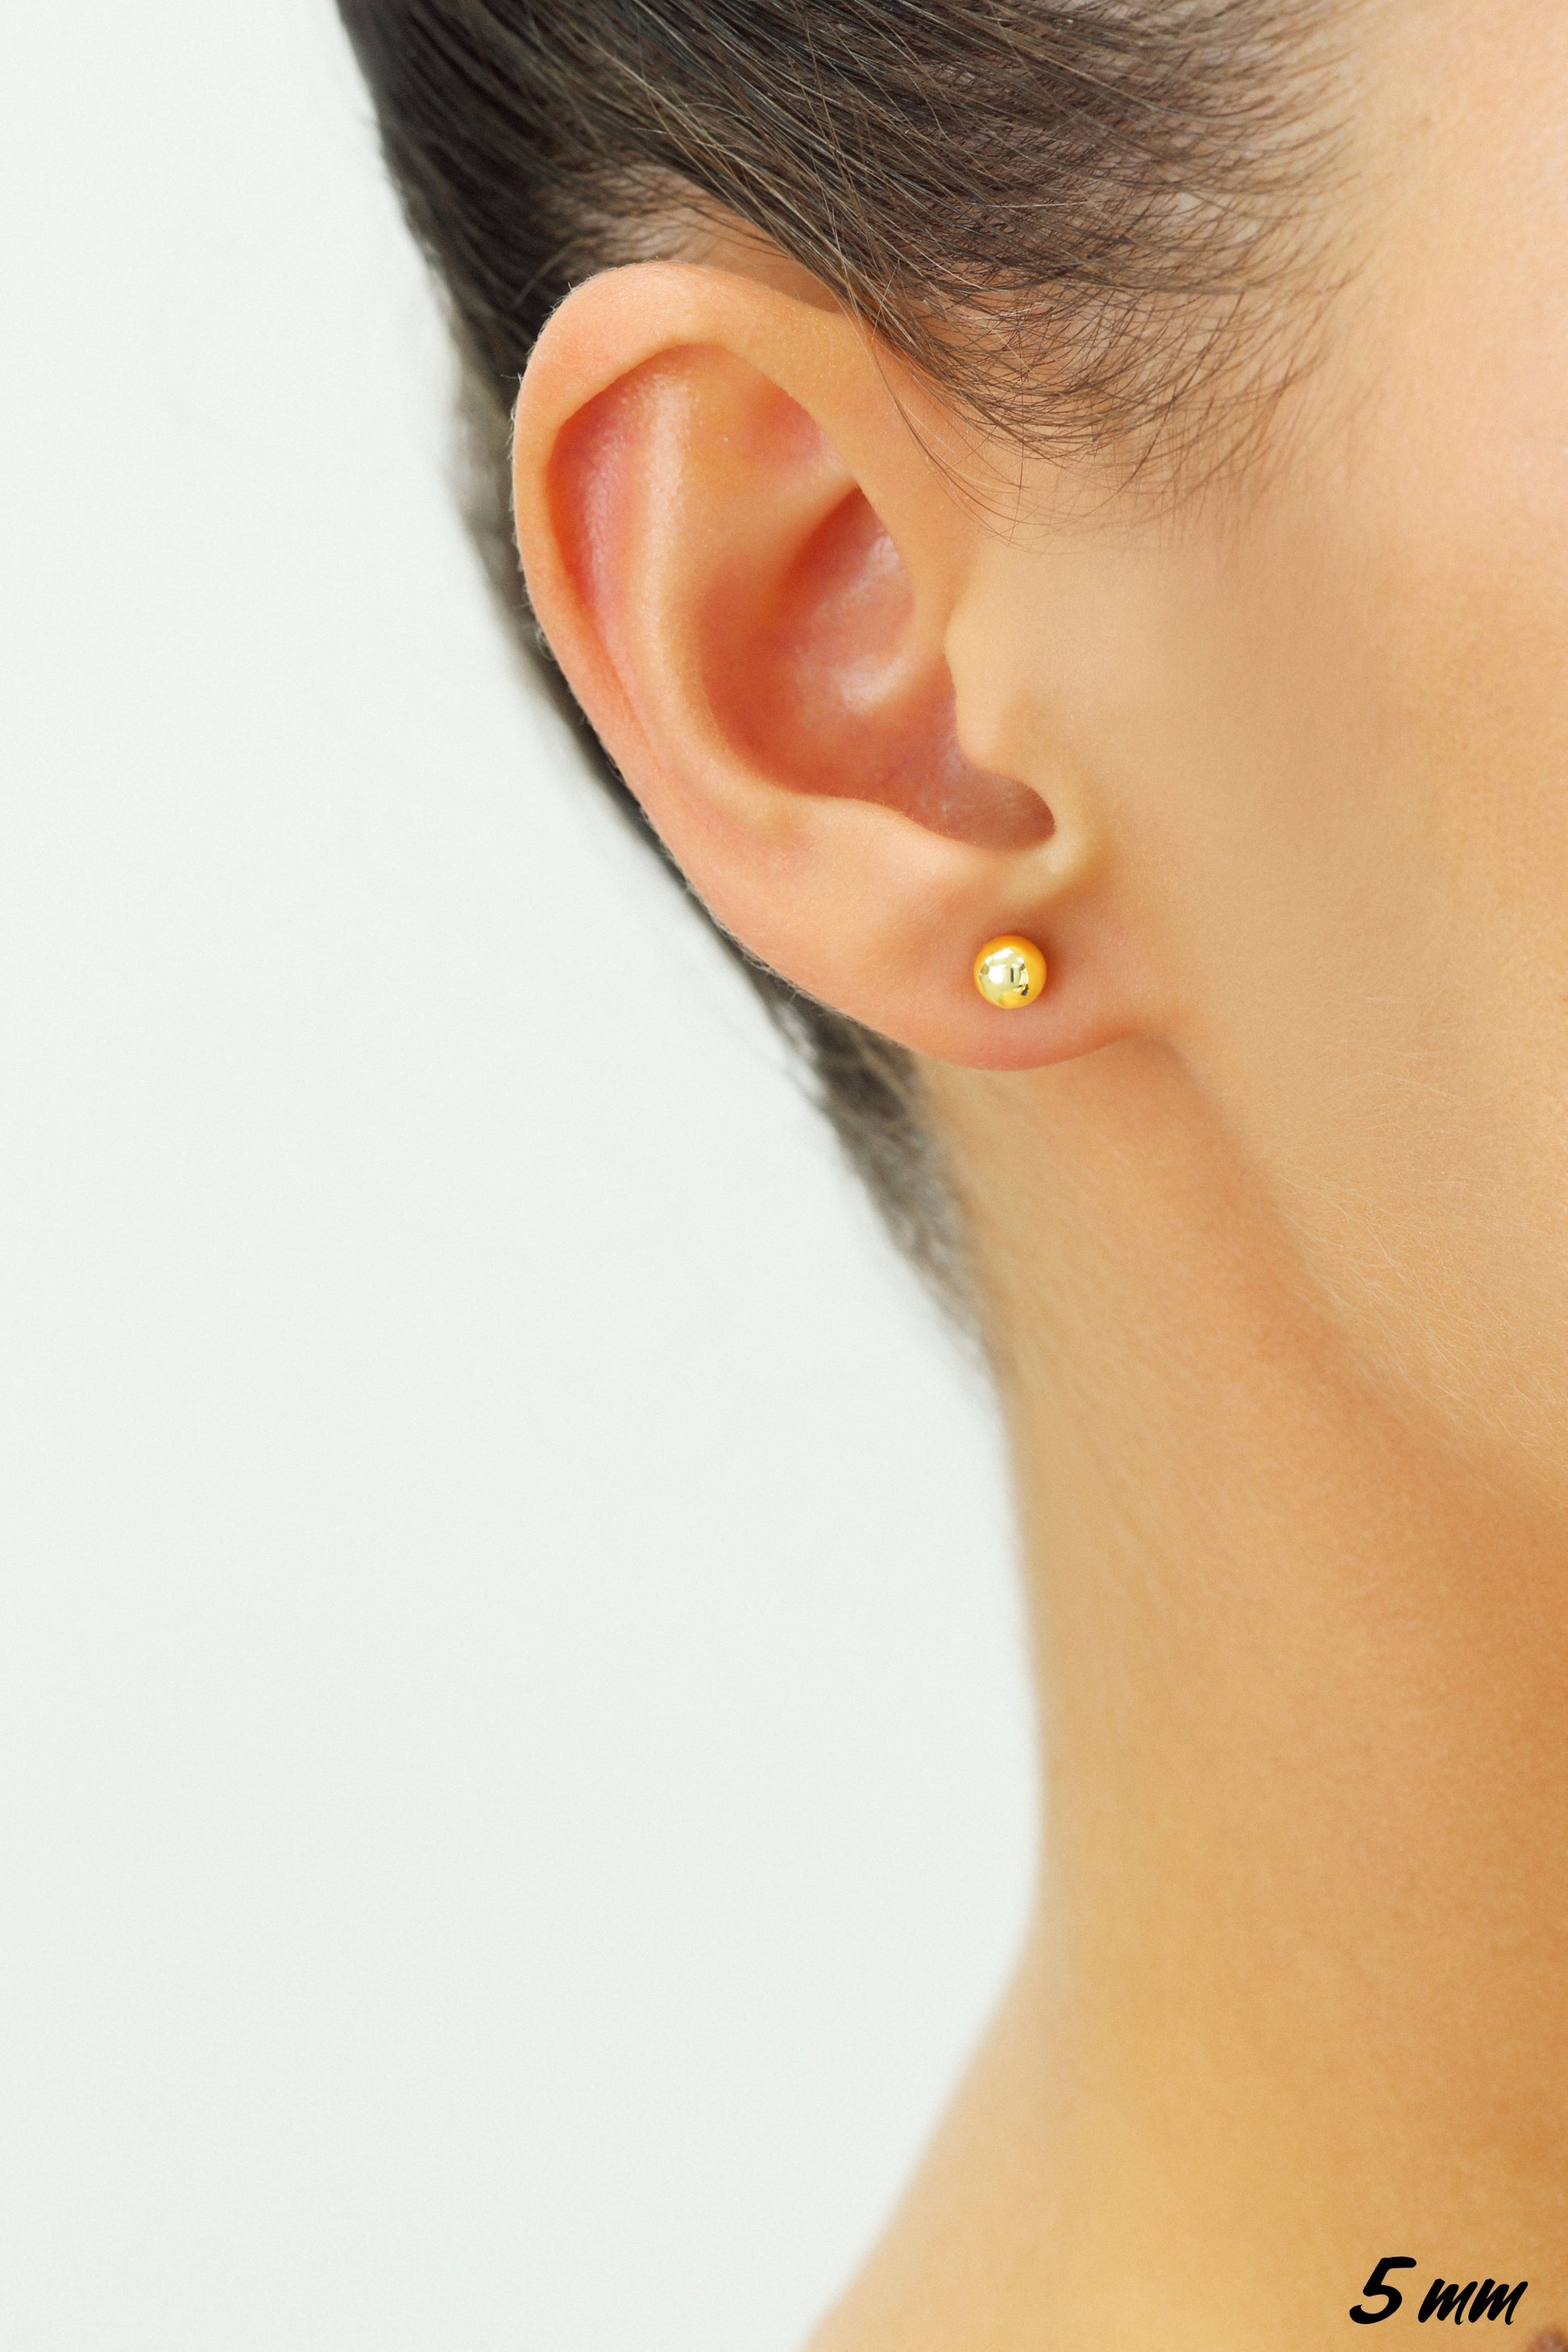 Solid 14K Gold Backings, Super Comfortable Ear Nuts for Pushbacks